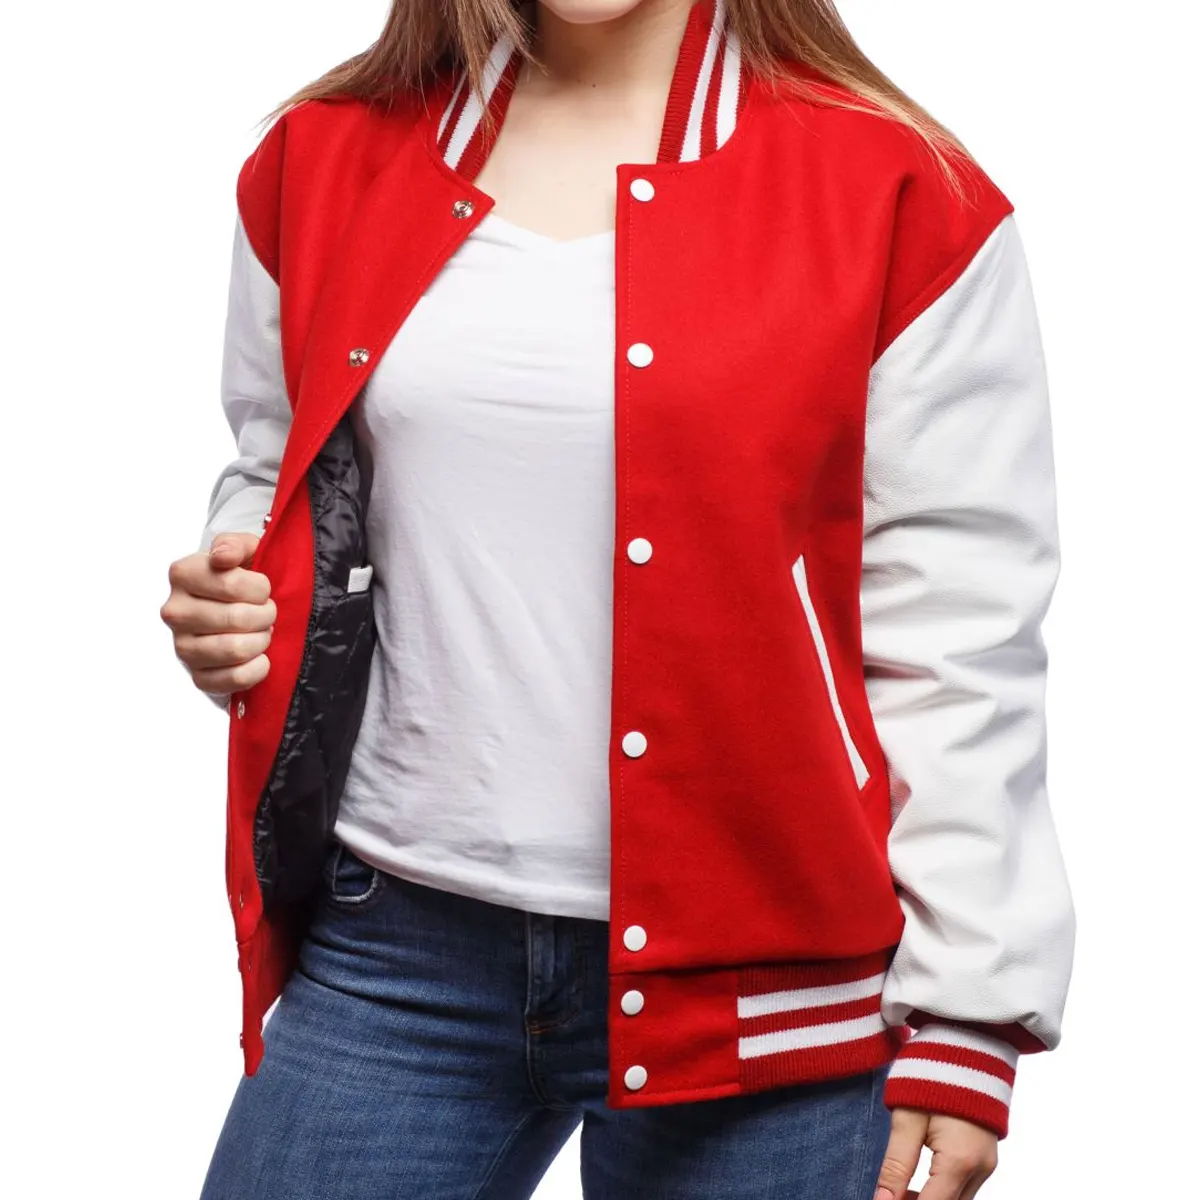 Women Red White Varsity Jacket Front View